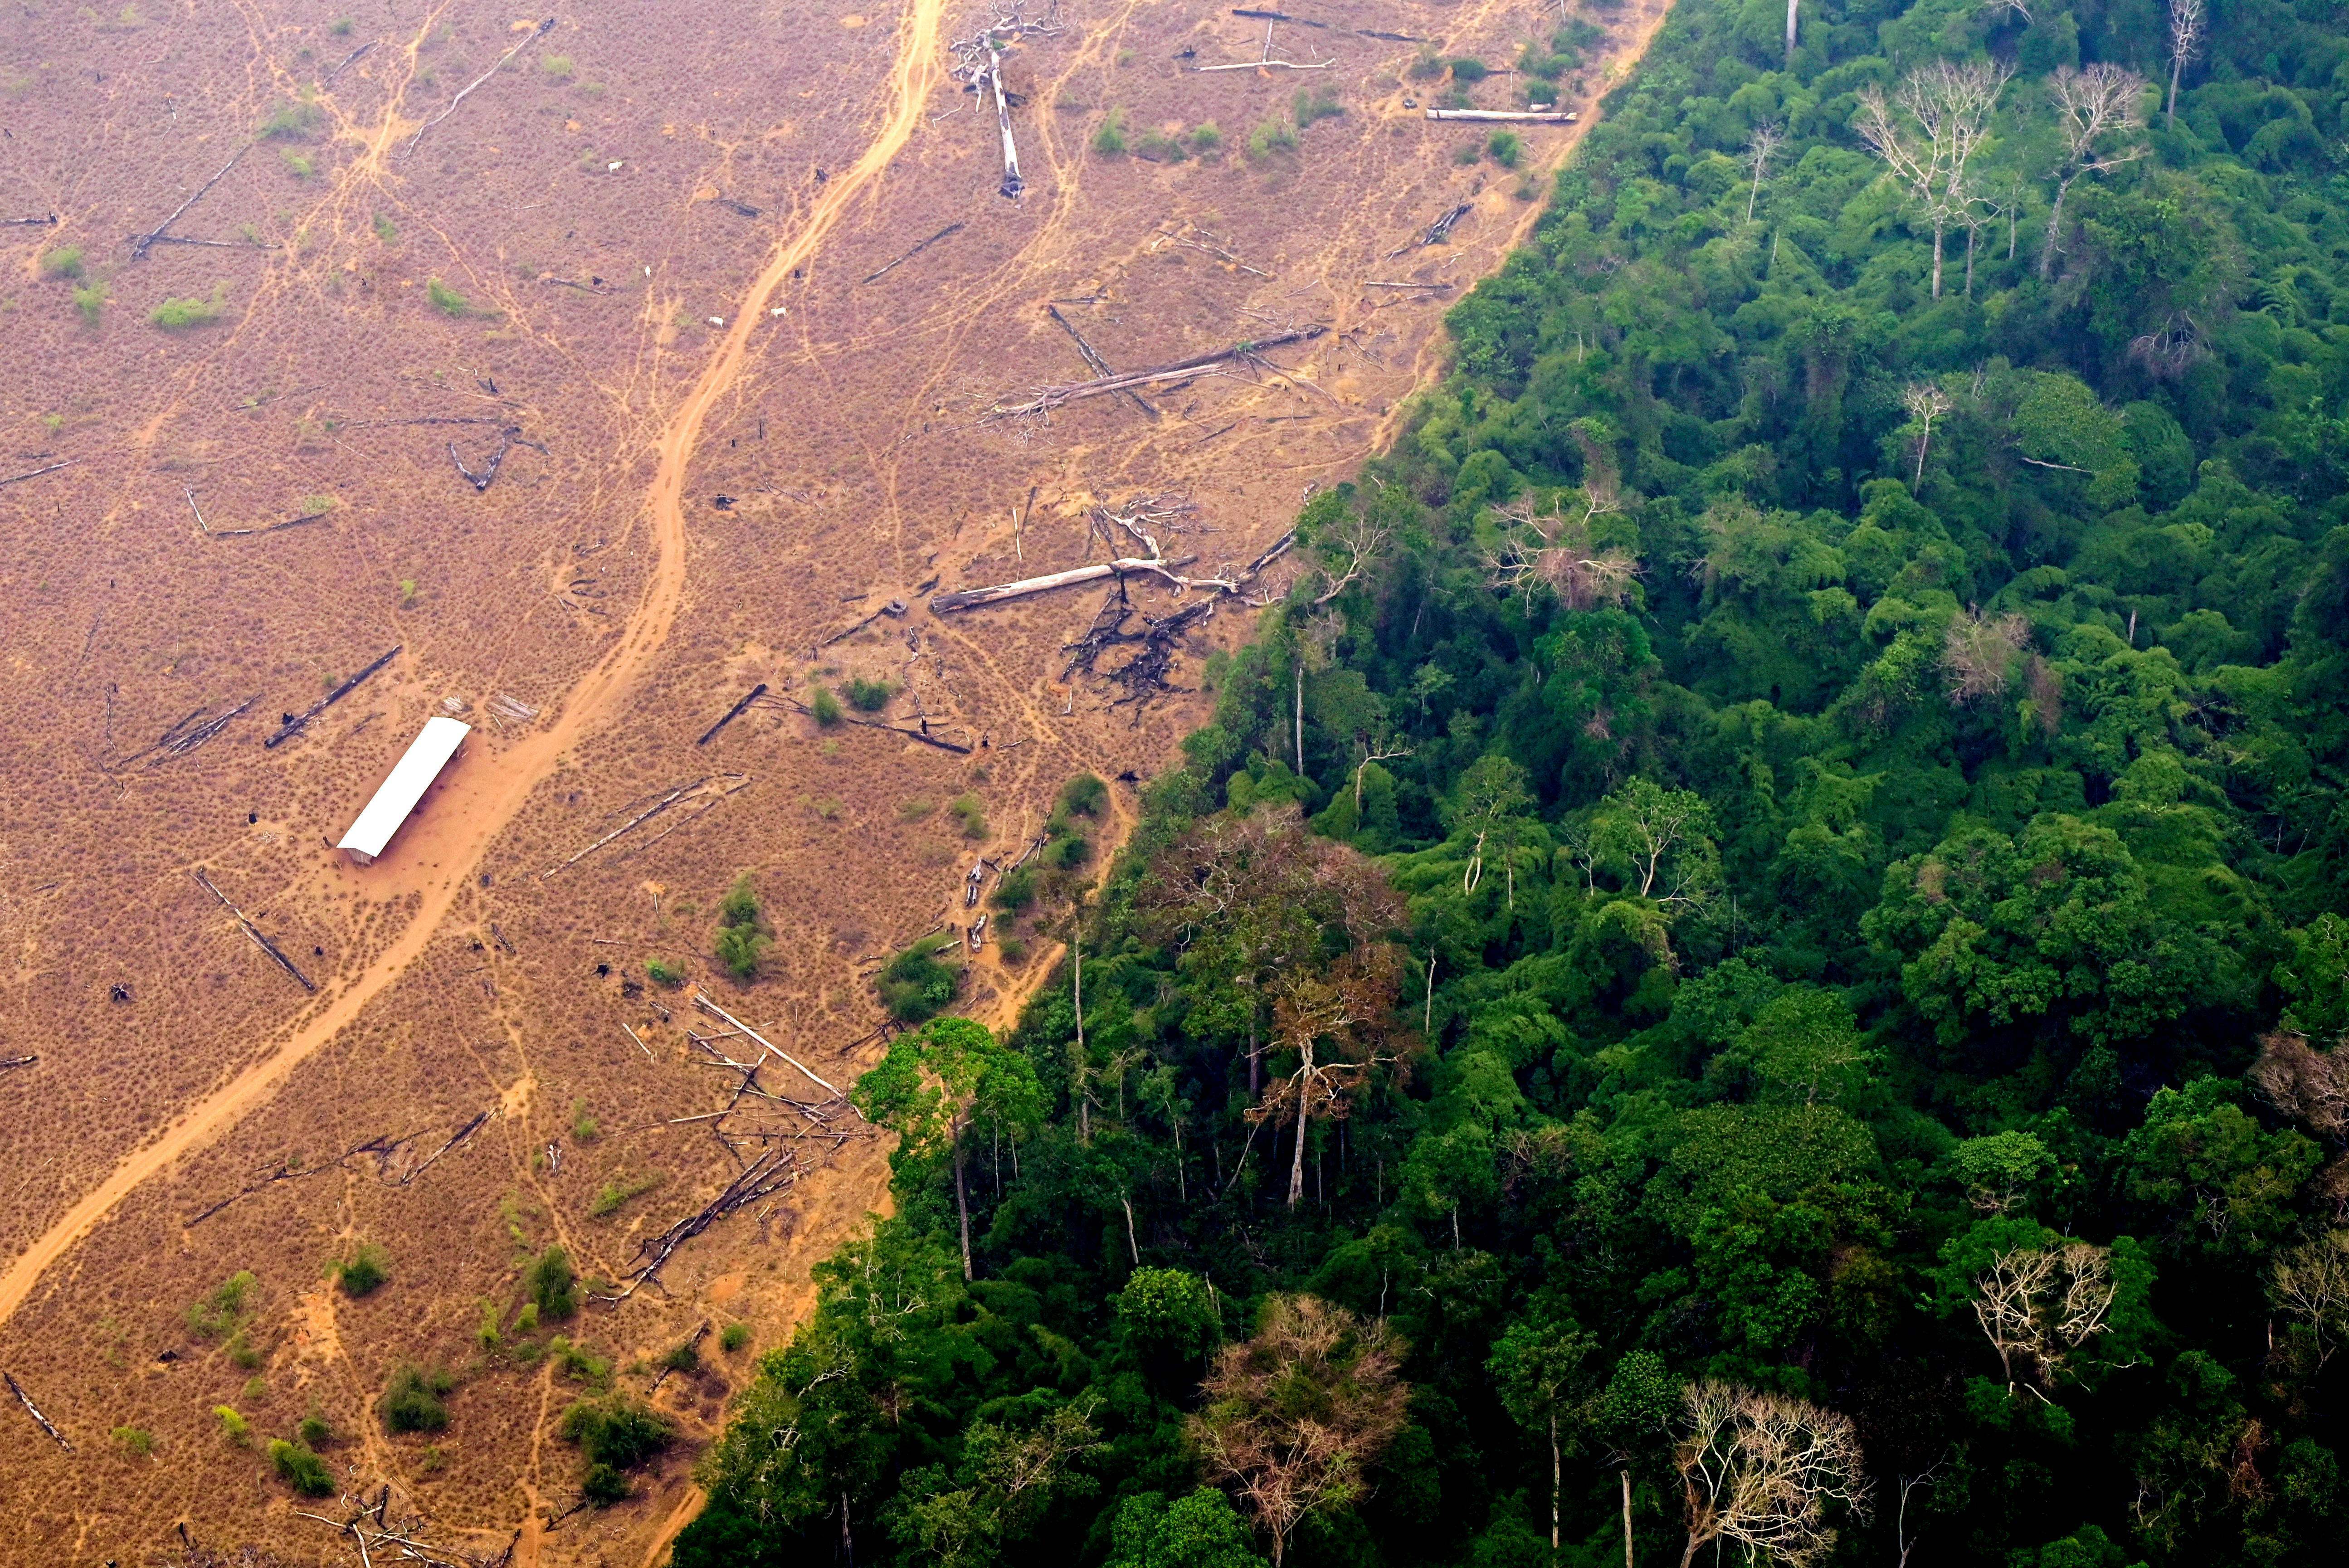 Deforestation Causes, Effects & Solutions To Preserve Trees